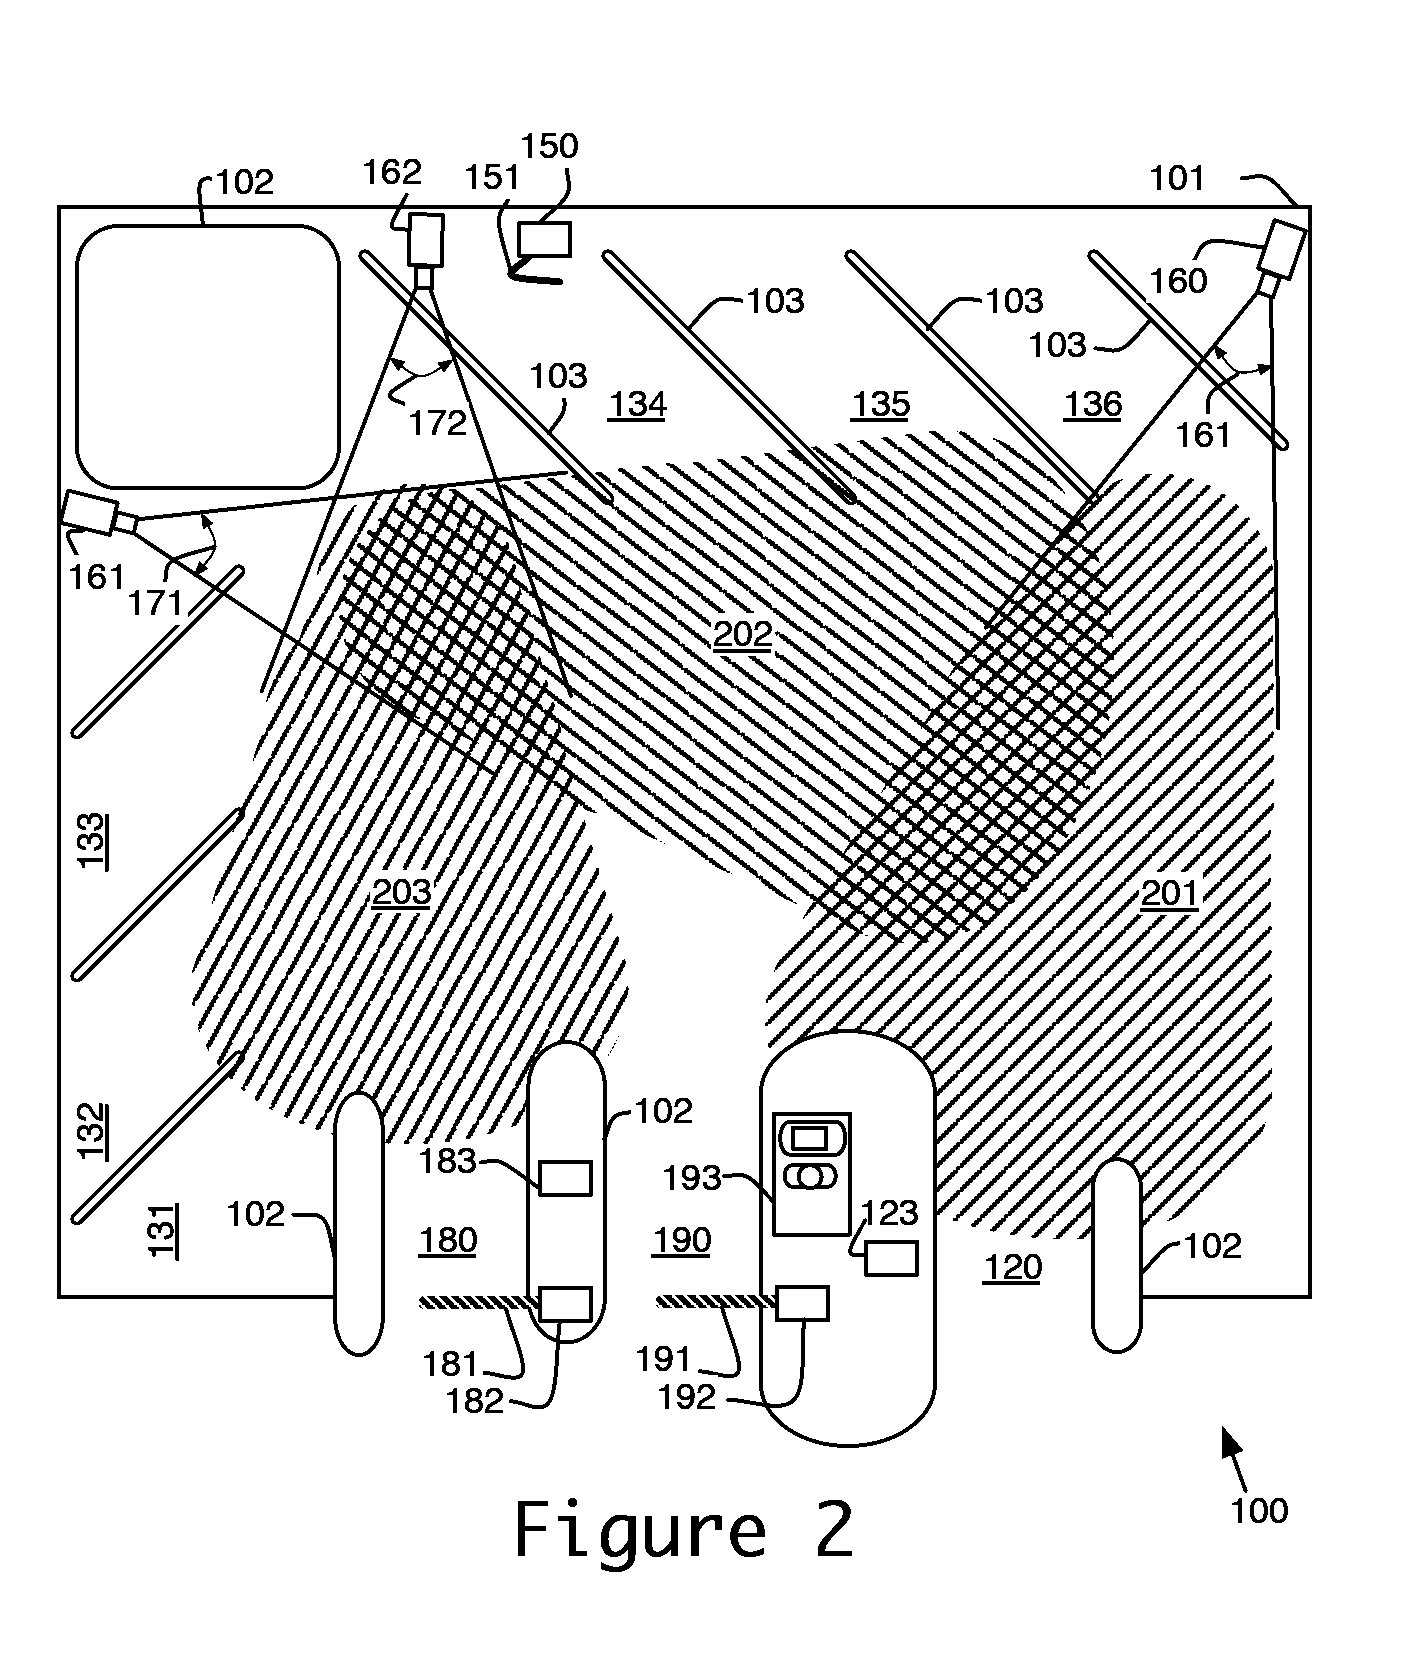 Unified parking management system and method based on optical data processing